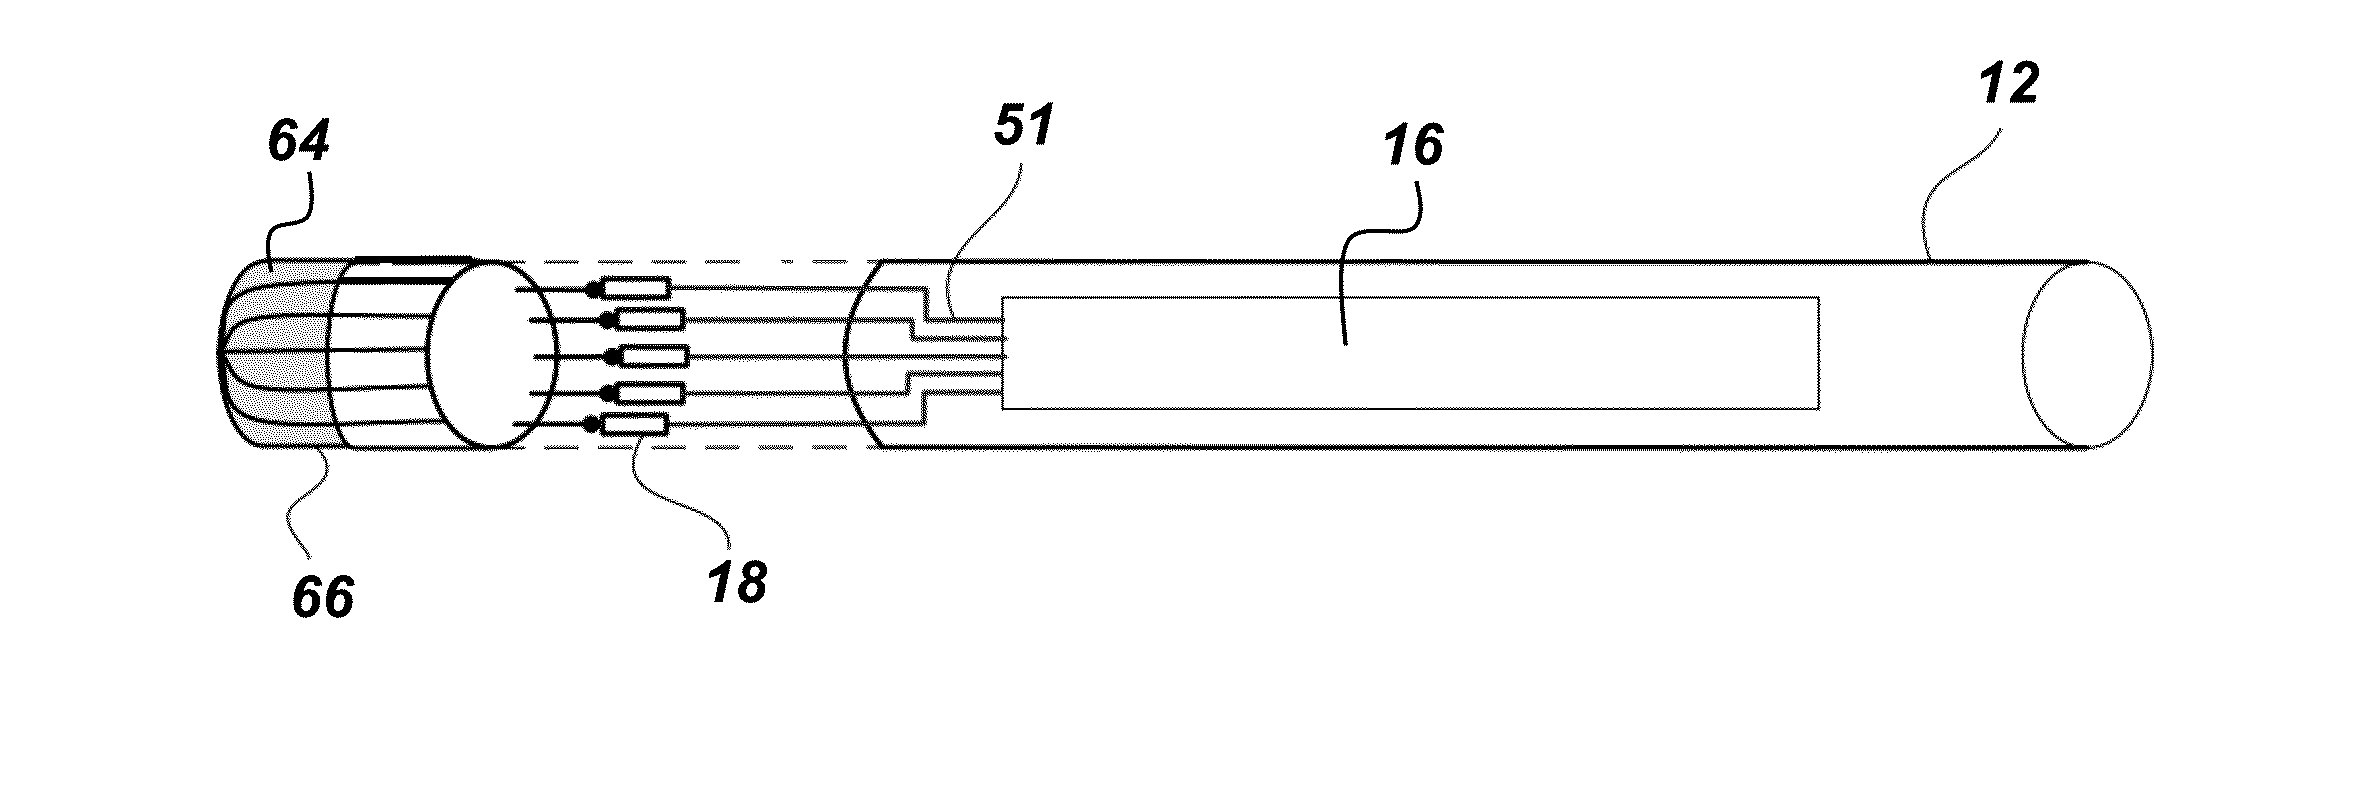 Active capacitive control stylus